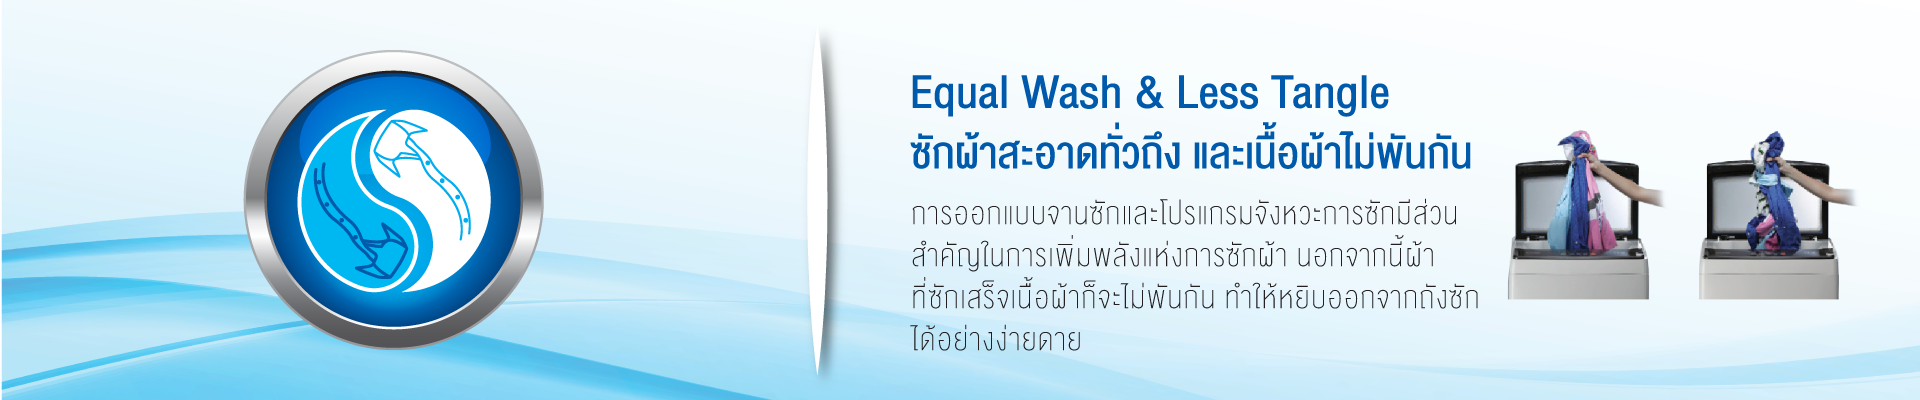 WM-Top---website-spec-patern---1920x400-Equal-Wash-_-Less-Tangle